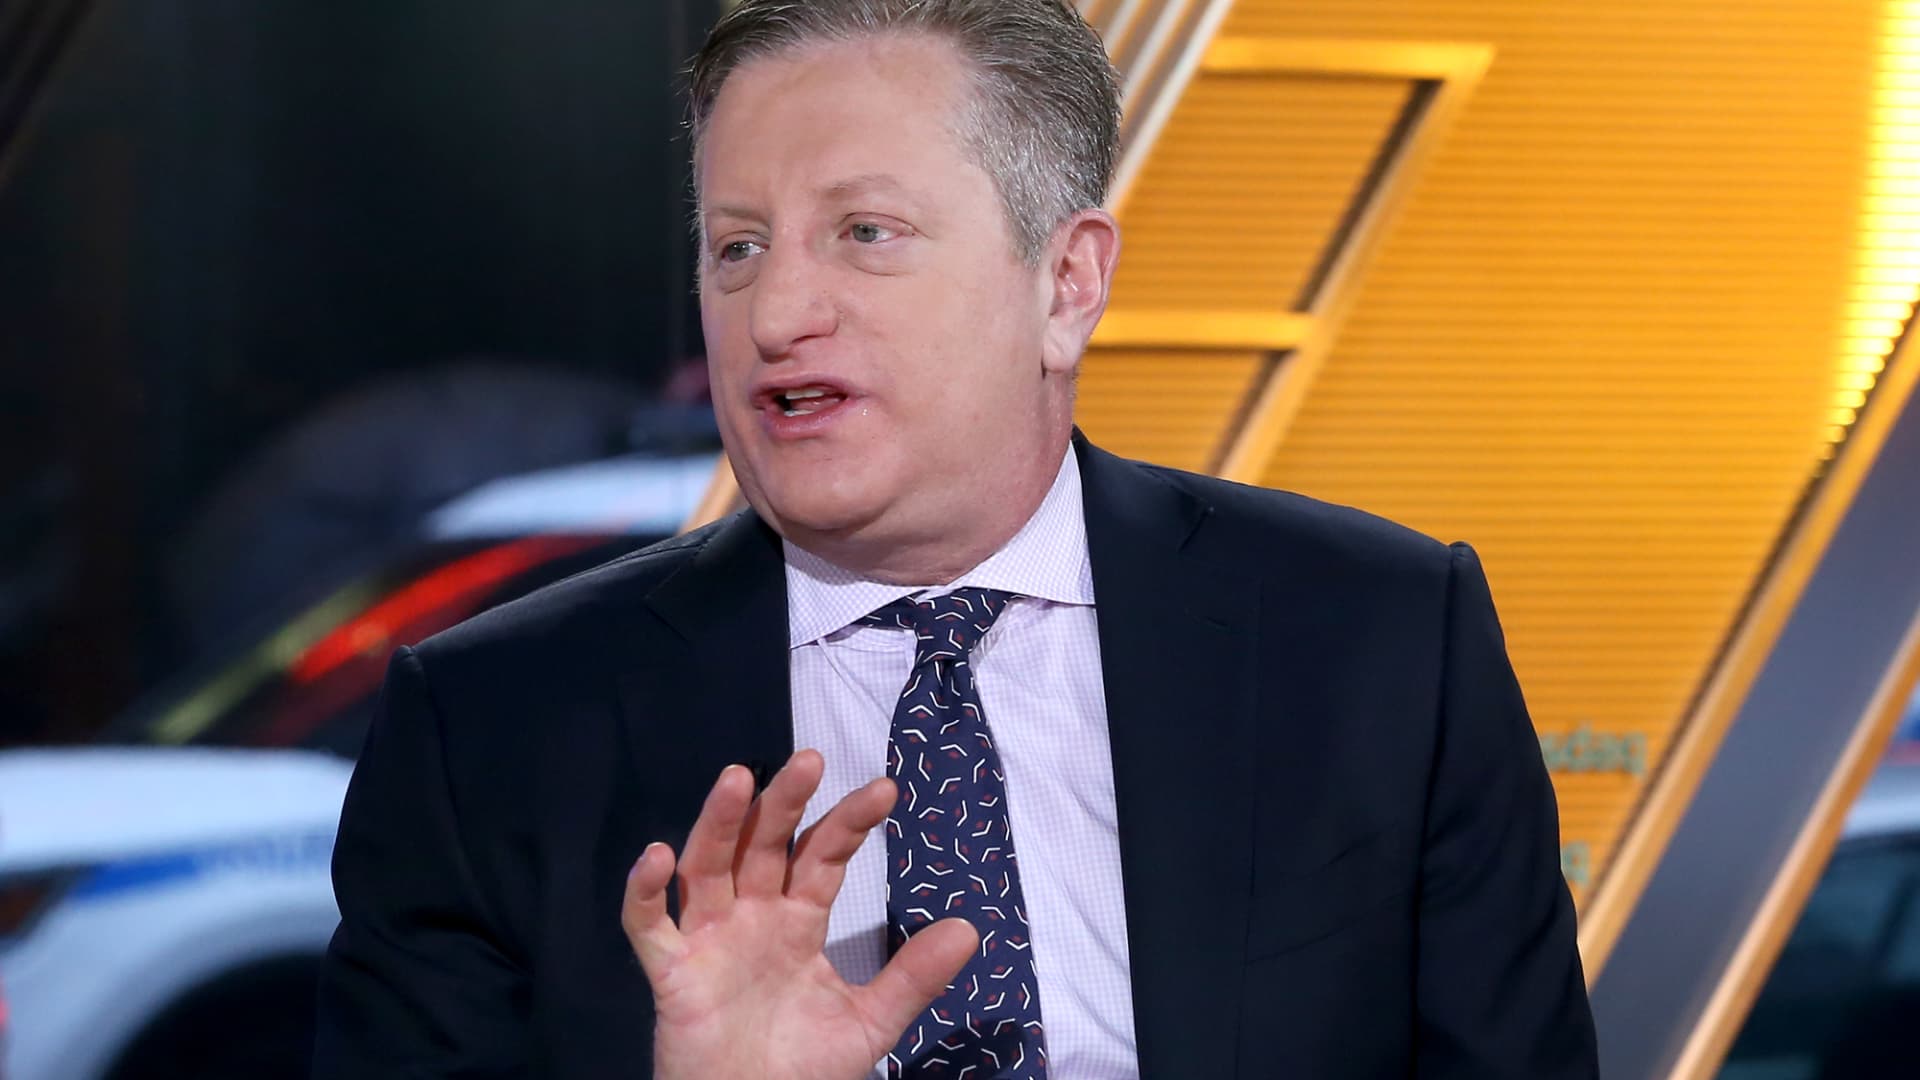 Steve Eisman says stocks can keep rising since there's no evidence of a recession